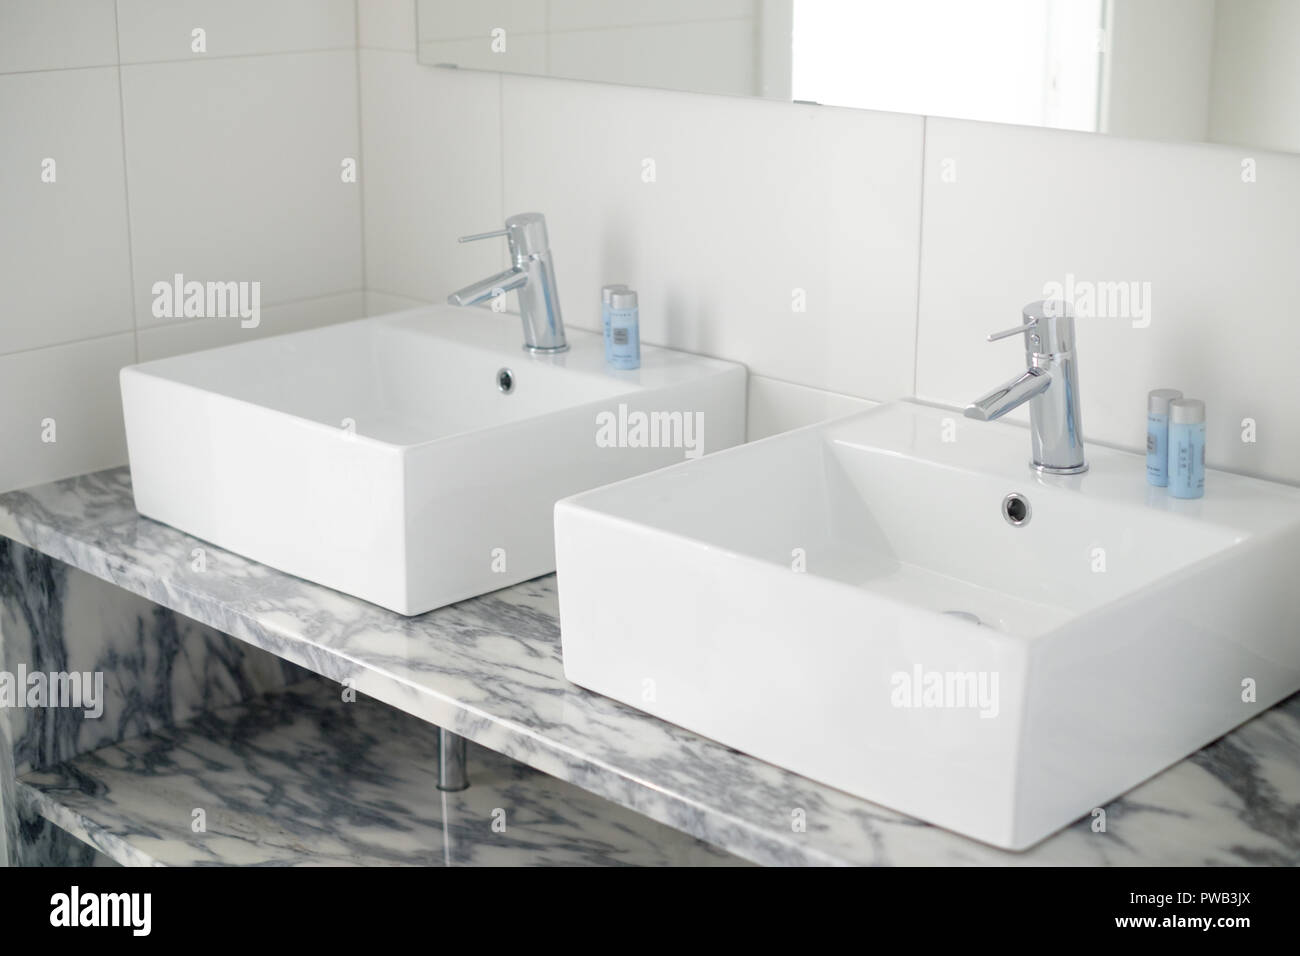 Bathroom with double his and hers basins Stock Photo